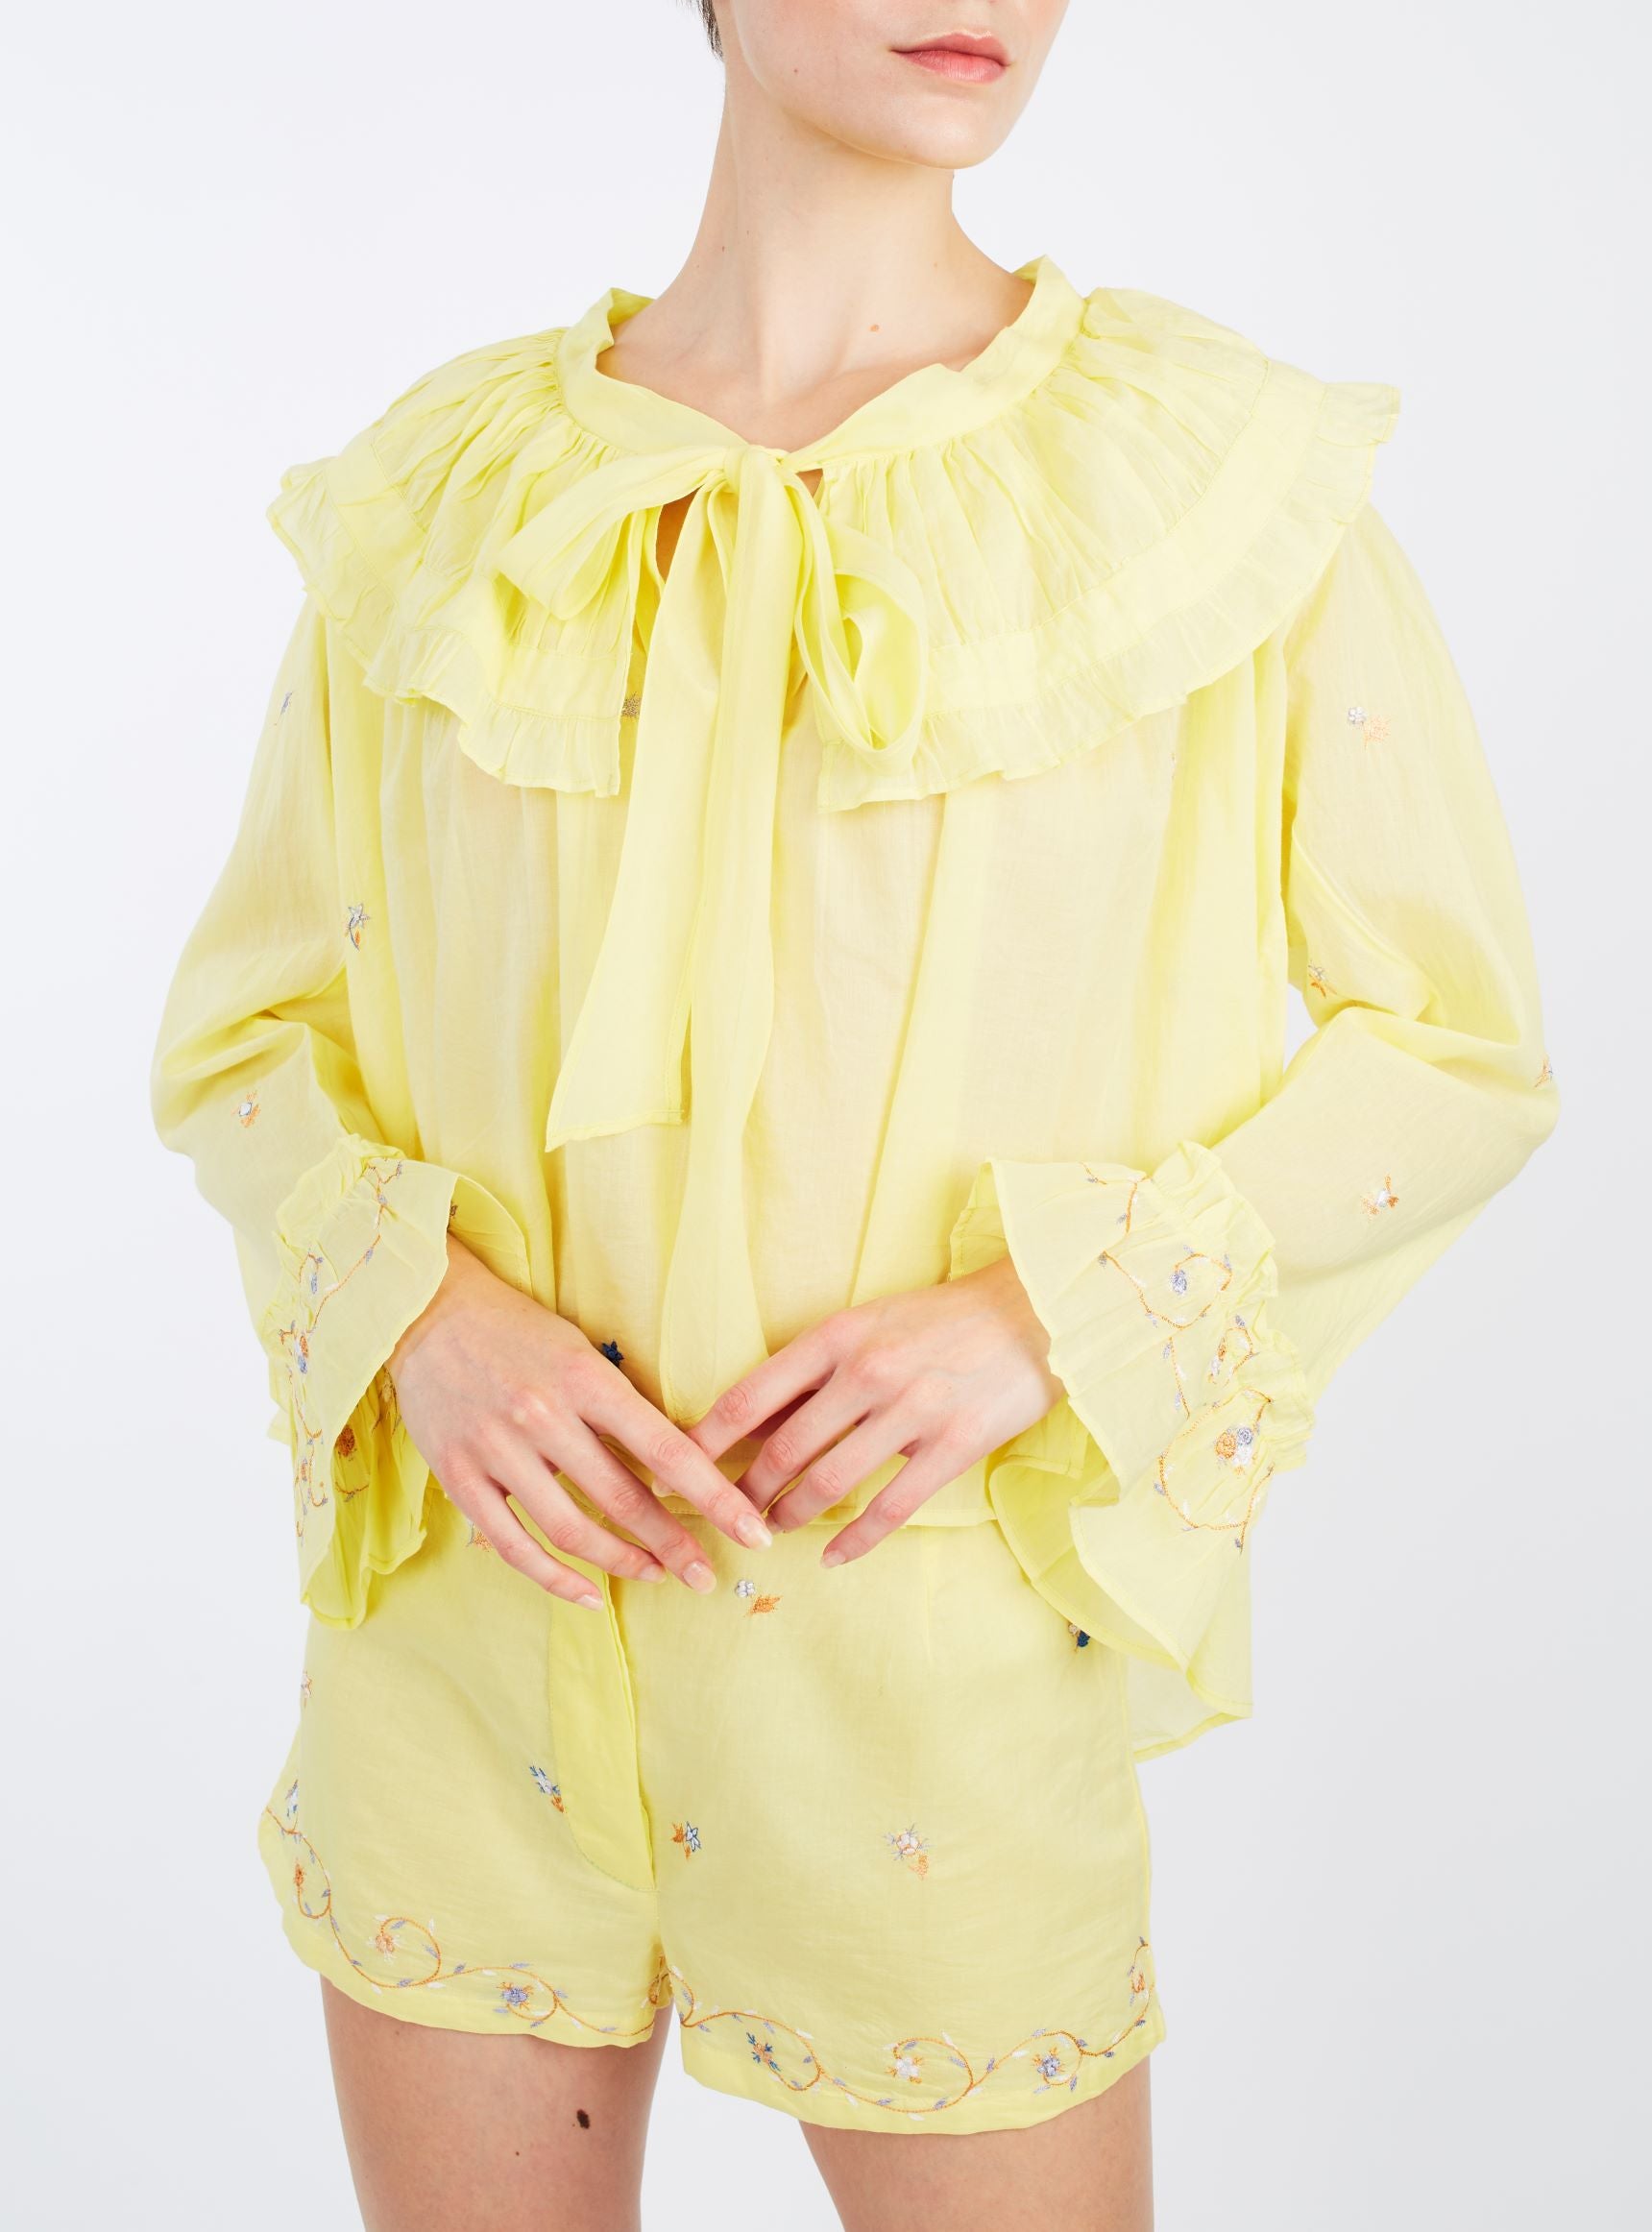 Dauphine Sweet Lemon blouse by Thierry Colson